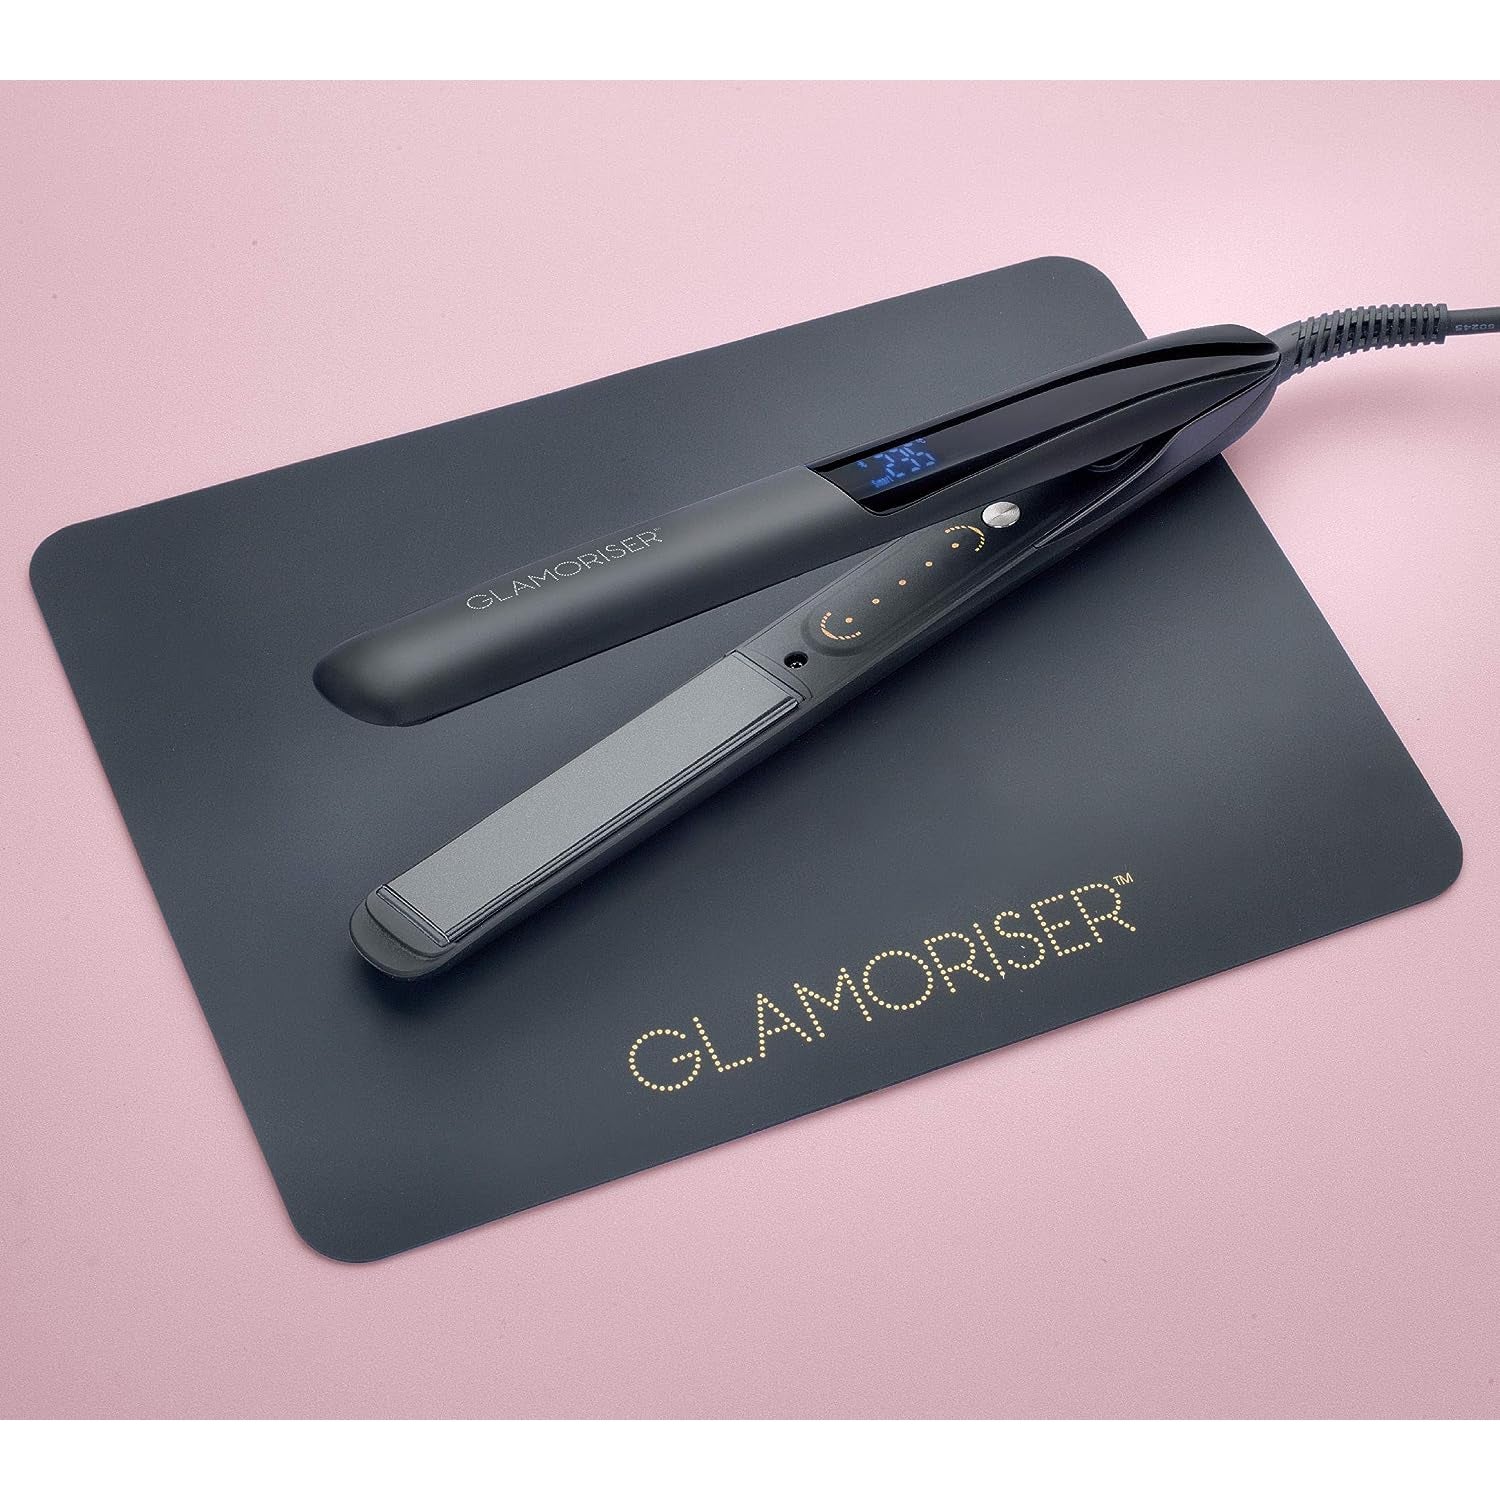 Glamoriser Smart Straightener with Black Diamond Oil Infused Ceramic Plates for Improved Conditioning & Shine